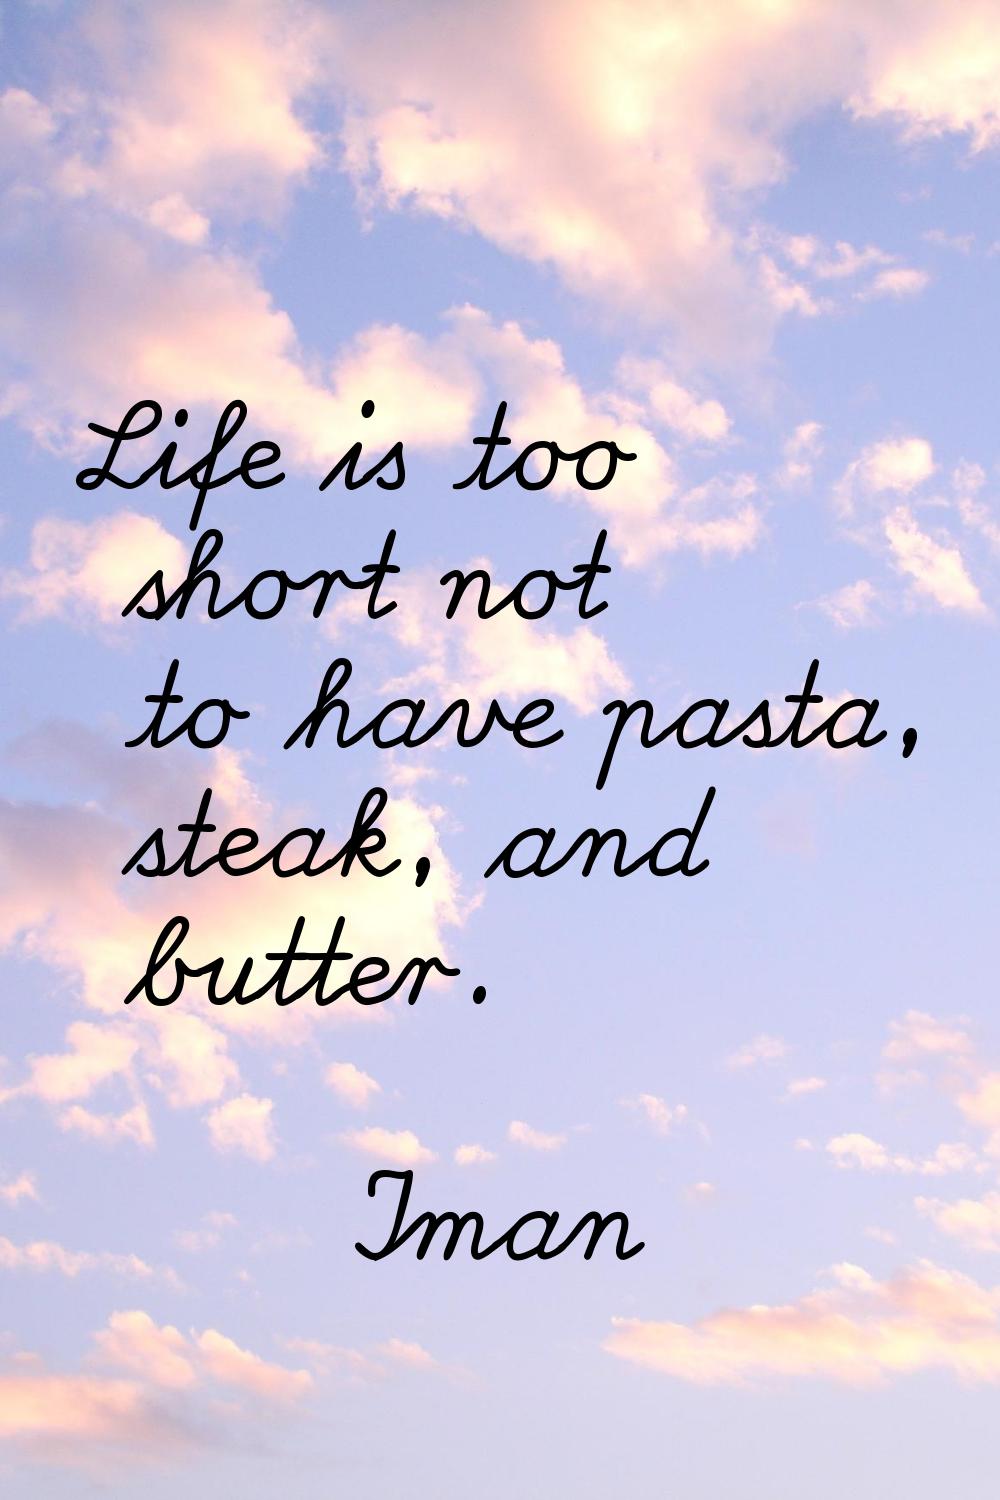 Life is too short not to have pasta, steak, and butter.